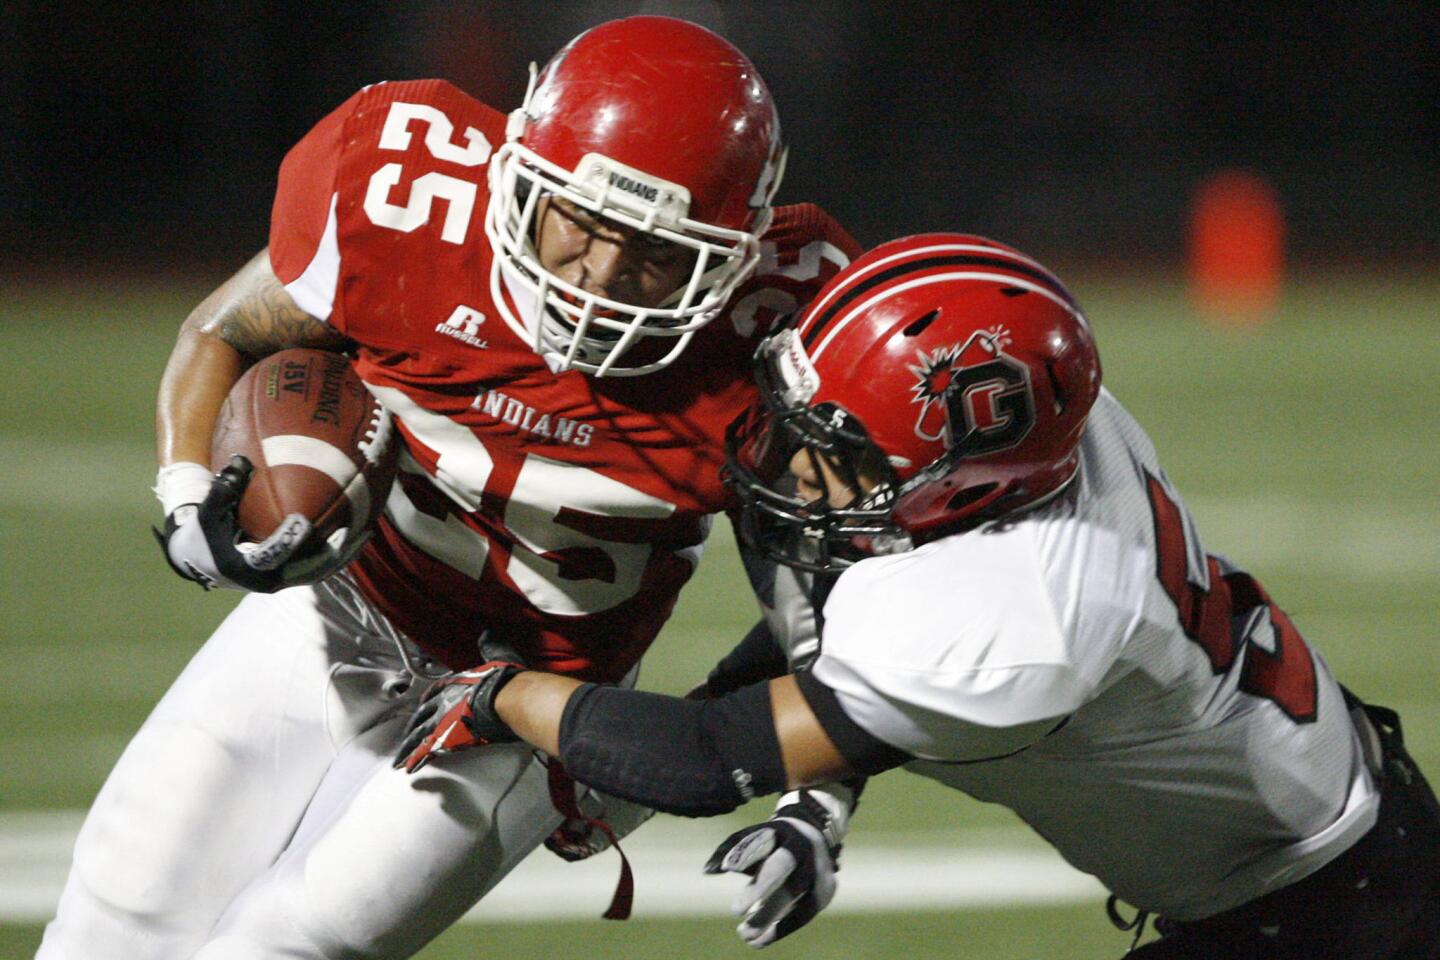 Burroughs' Israel Montes, left, gets tackled by Glendale's Carlo Maquiddang during a game at John Burroughs High School in Burbank on Thursday, September 27, 2012.